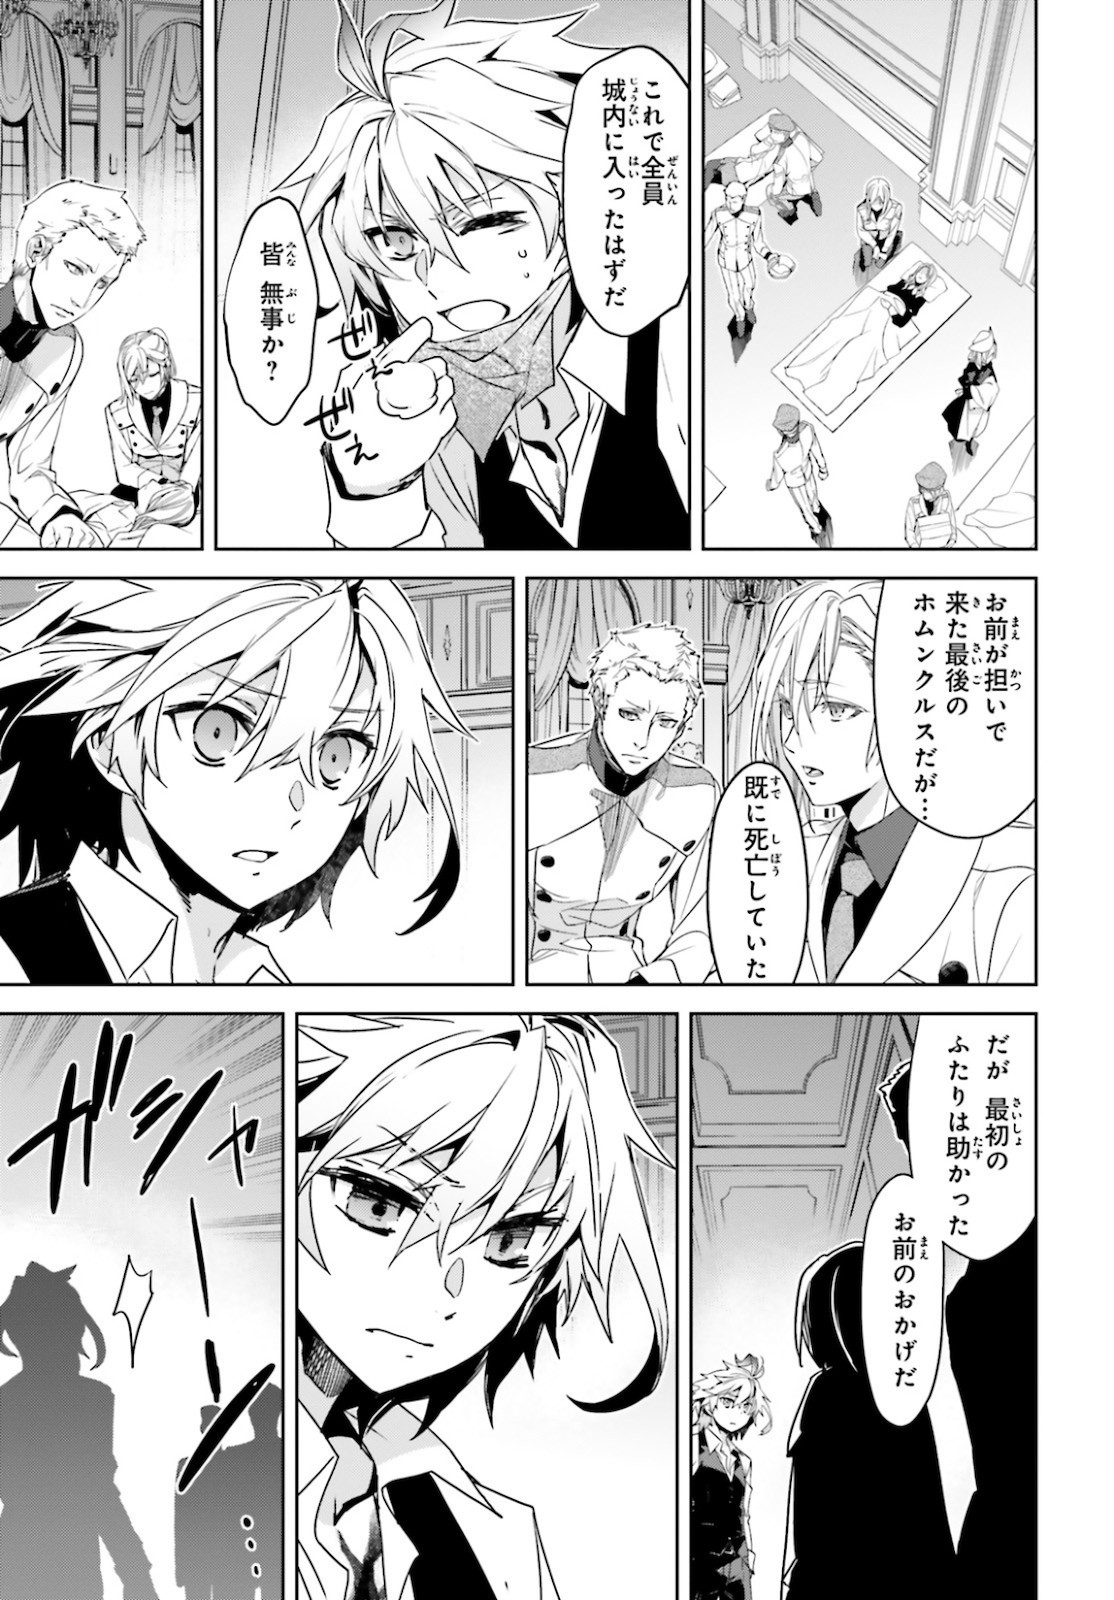 Fate-Apocrypha - Chapter 45 - Page 15